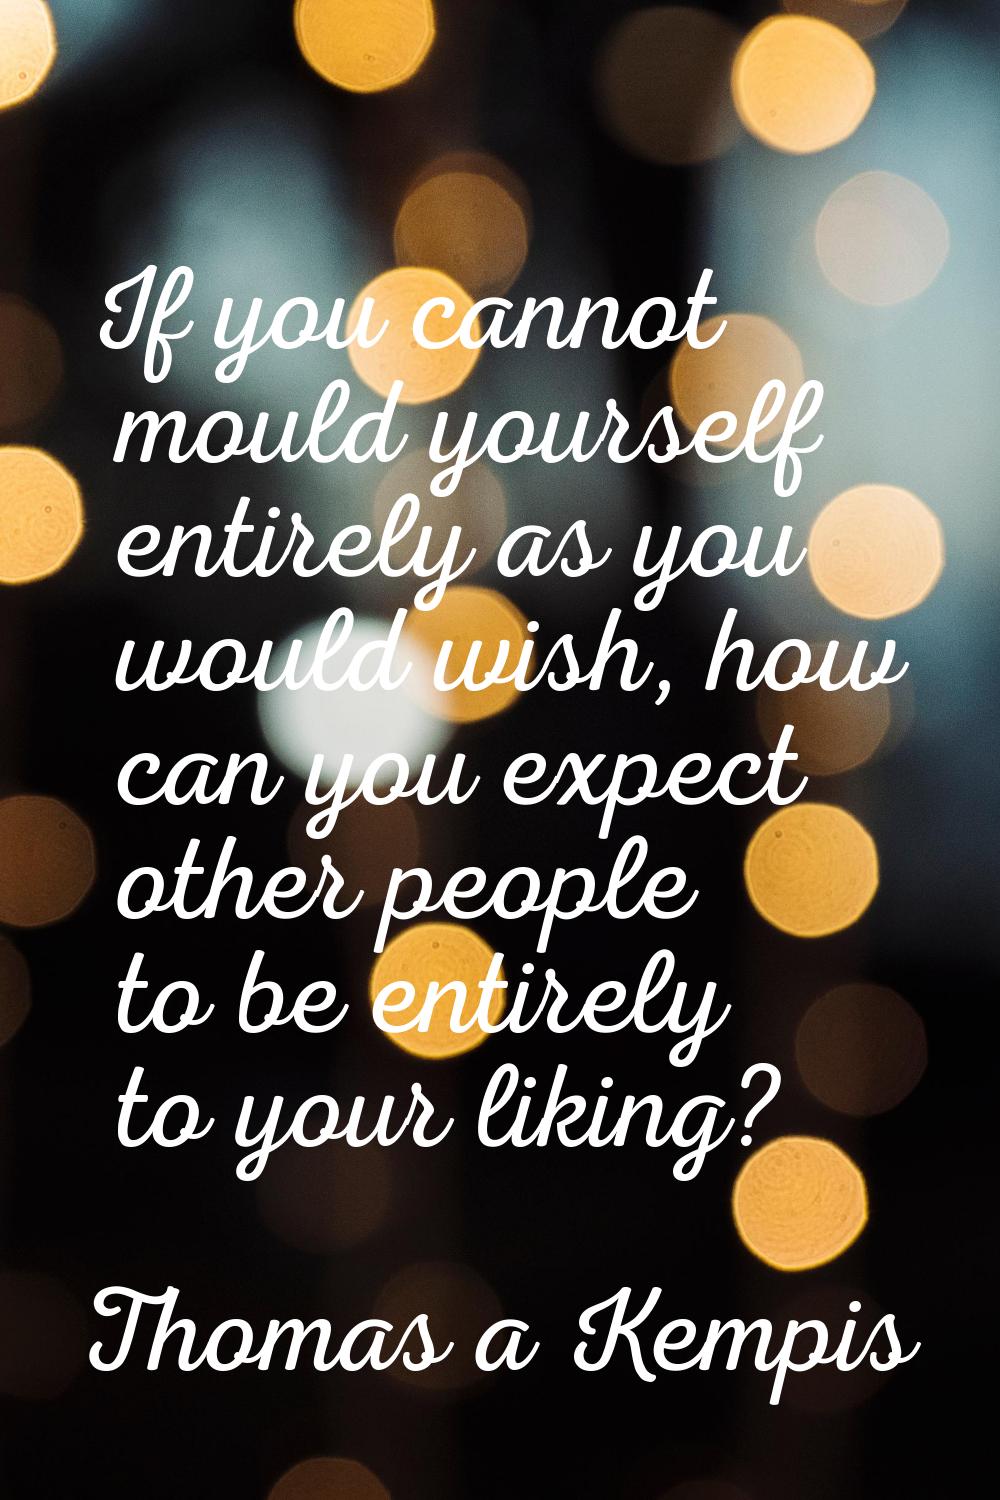 If you cannot mould yourself entirely as you would wish, how can you expect other people to be enti